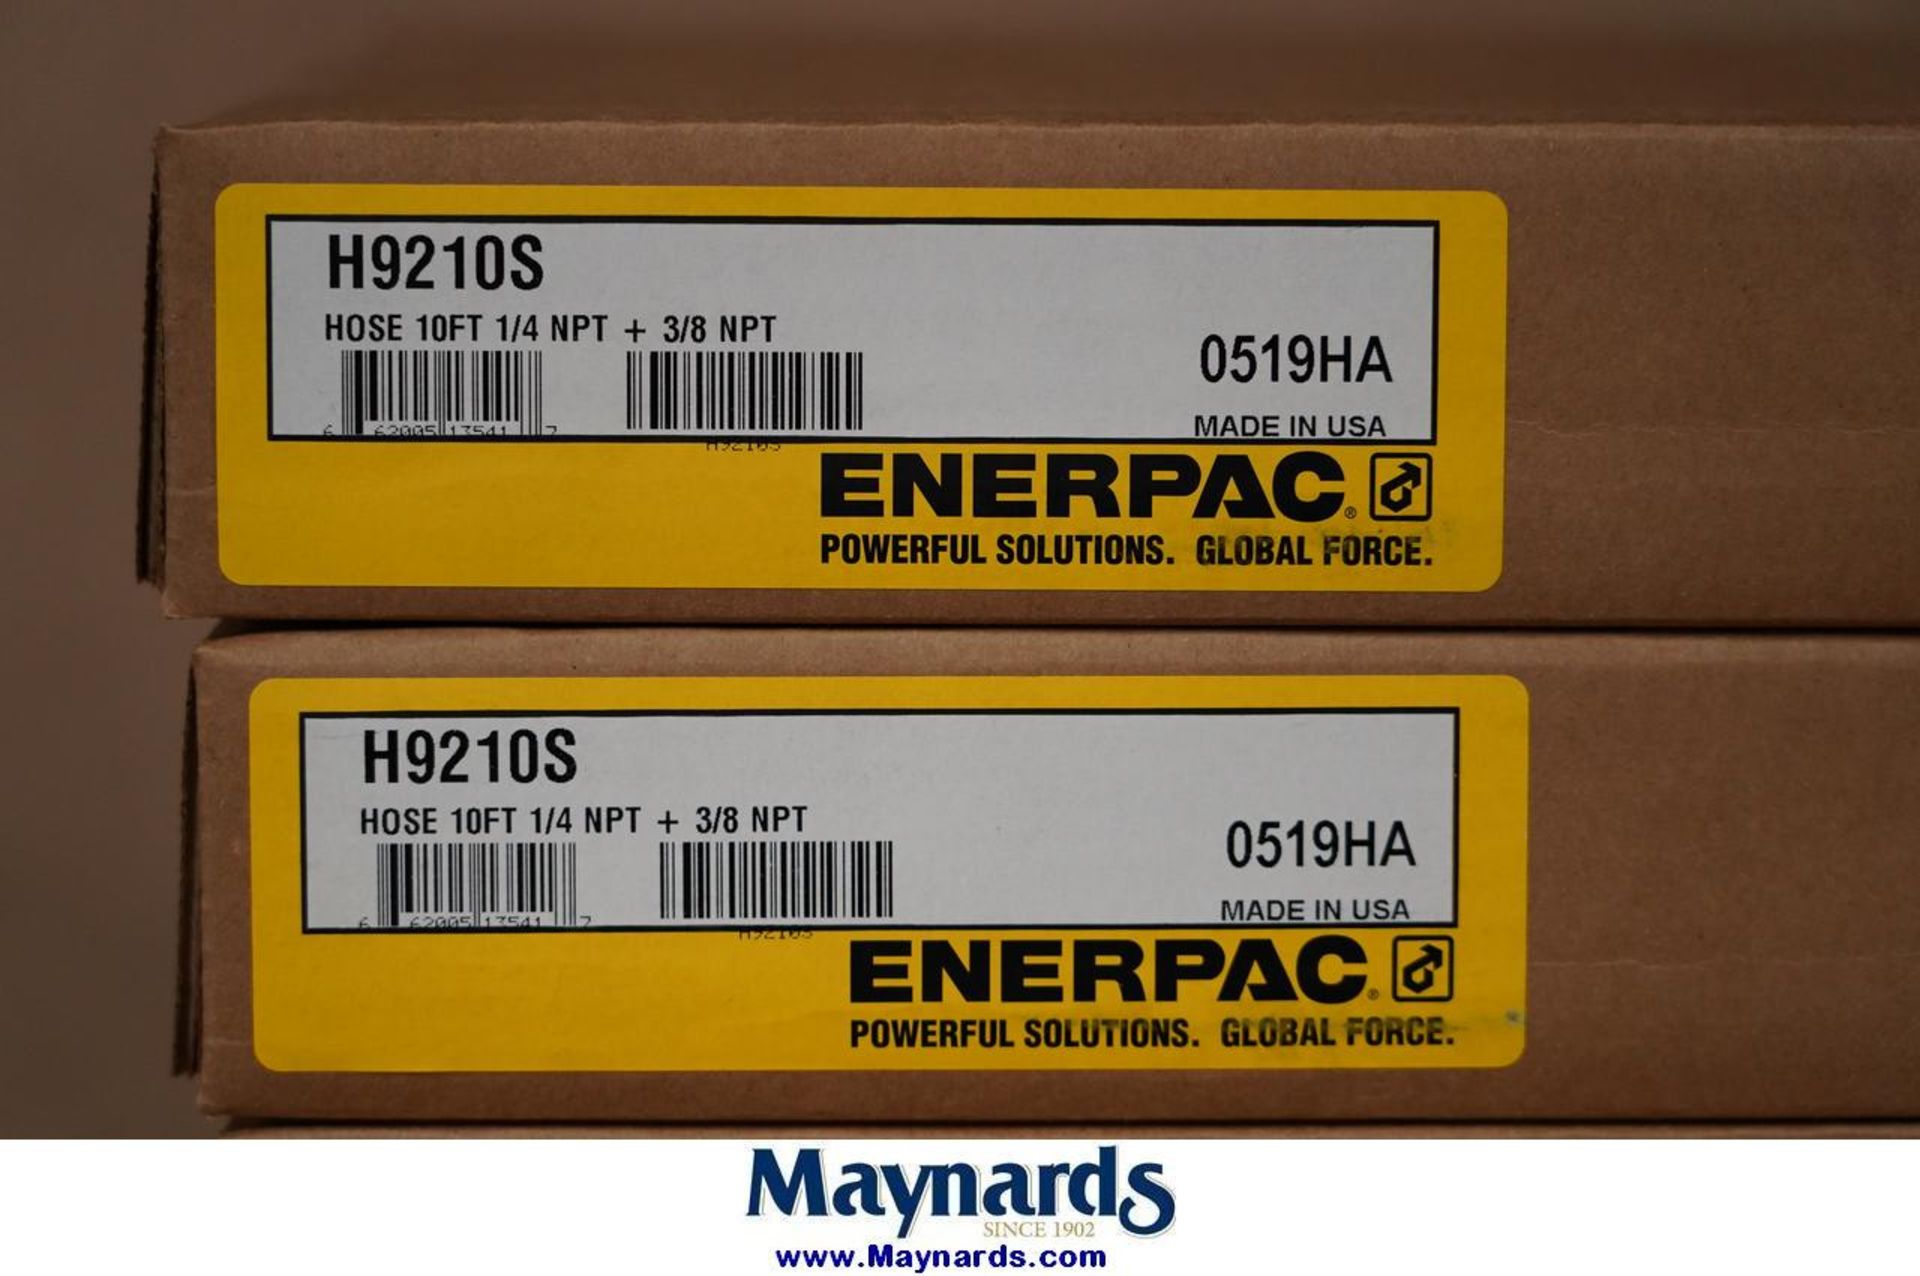 Enerpac H9210S (5) 10 Ft Heavy Duty Rubber High Pressure Hydraulic Hose - Image 2 of 3